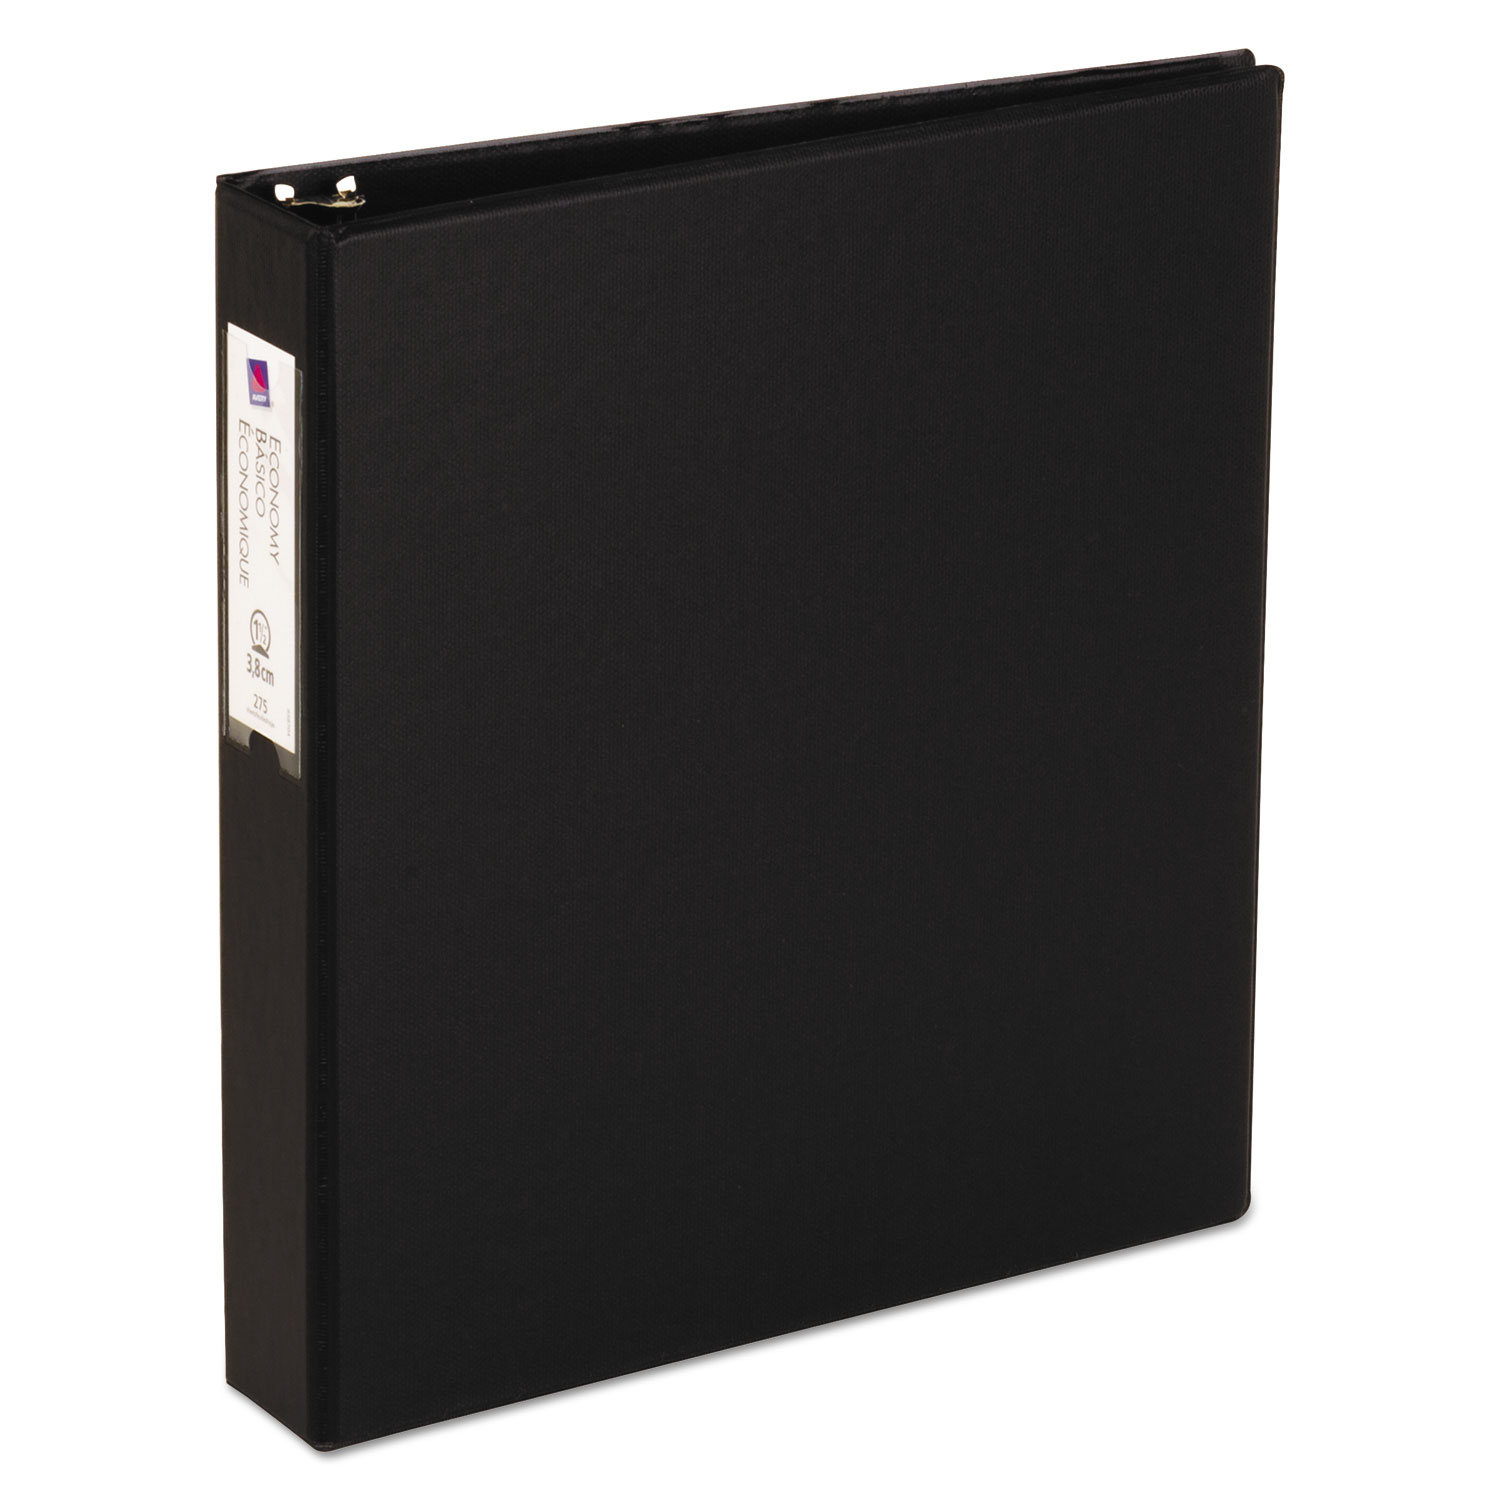  Avery 04401 Economy Non-View Binder with Round Rings, 3 Rings, 1.5 Capacity, 11 x 8.5, Black (AVE04401) 